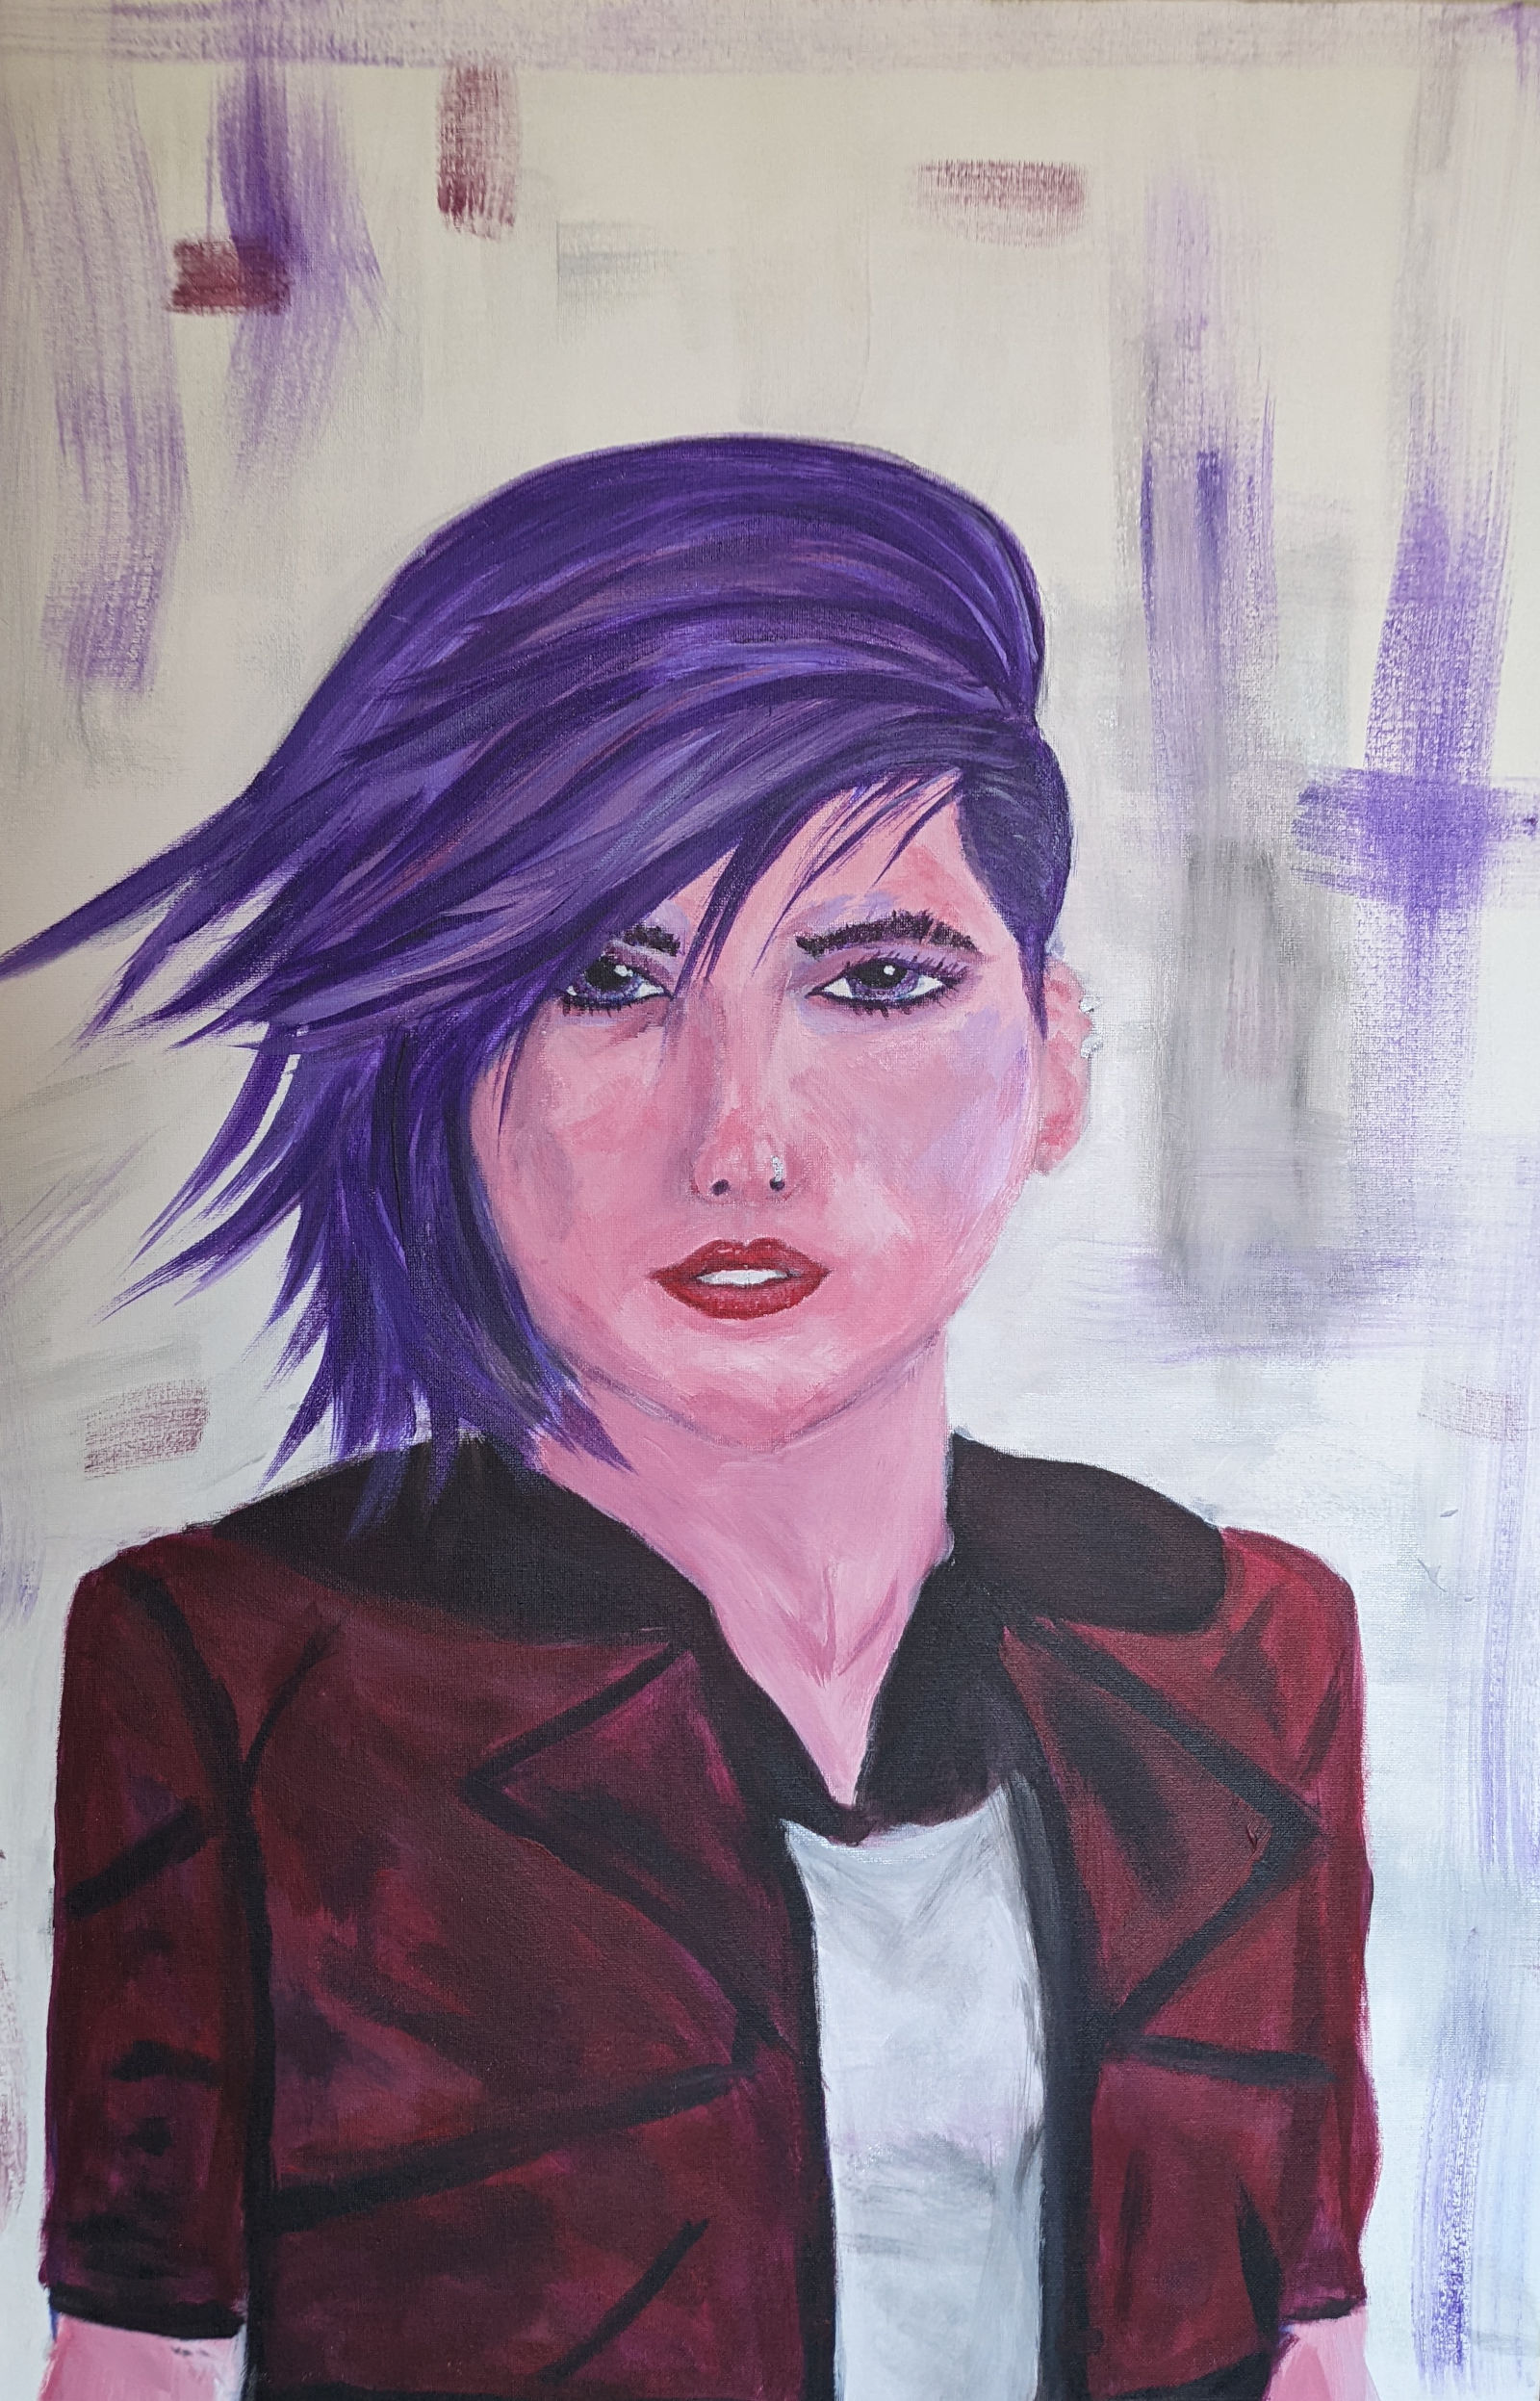 Painting of a woman with short purple hair.